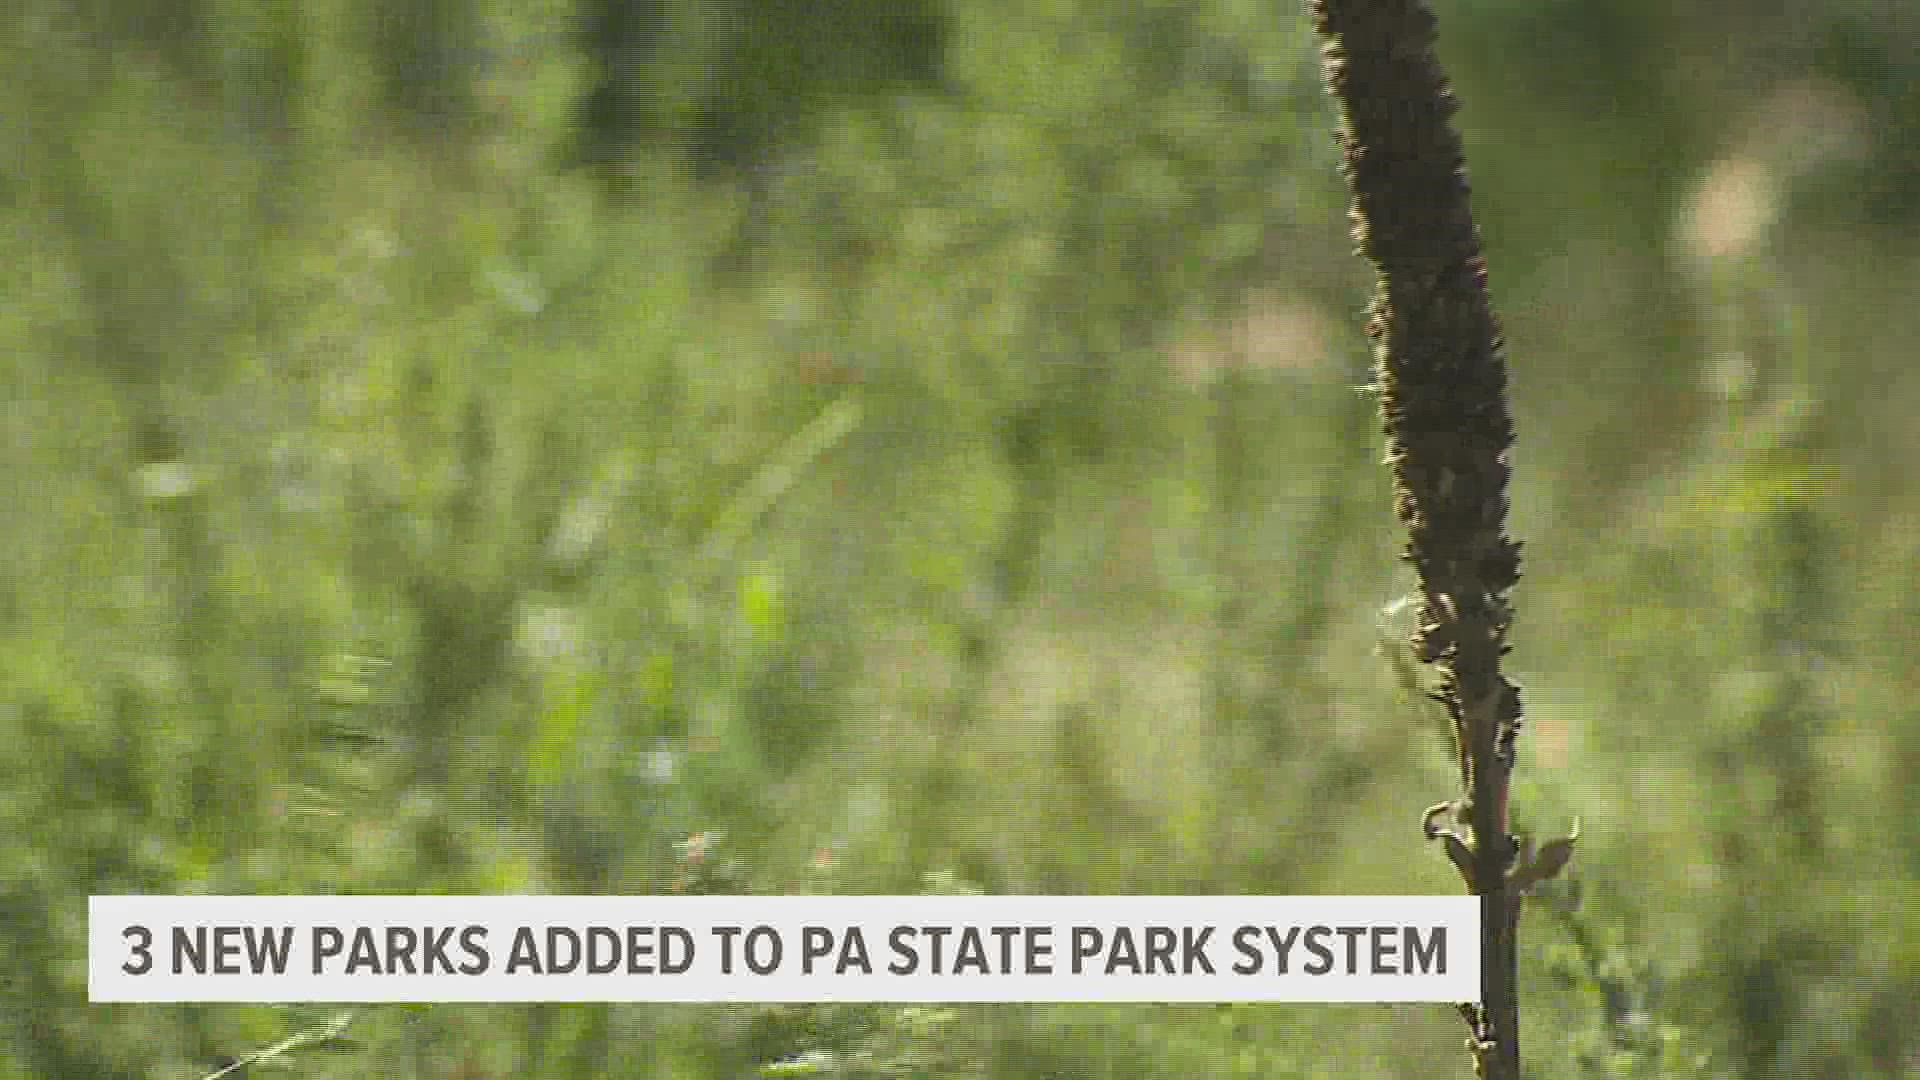 Gov. Tom Wolf announced the additions to the state's 121-park system on Tuesday.